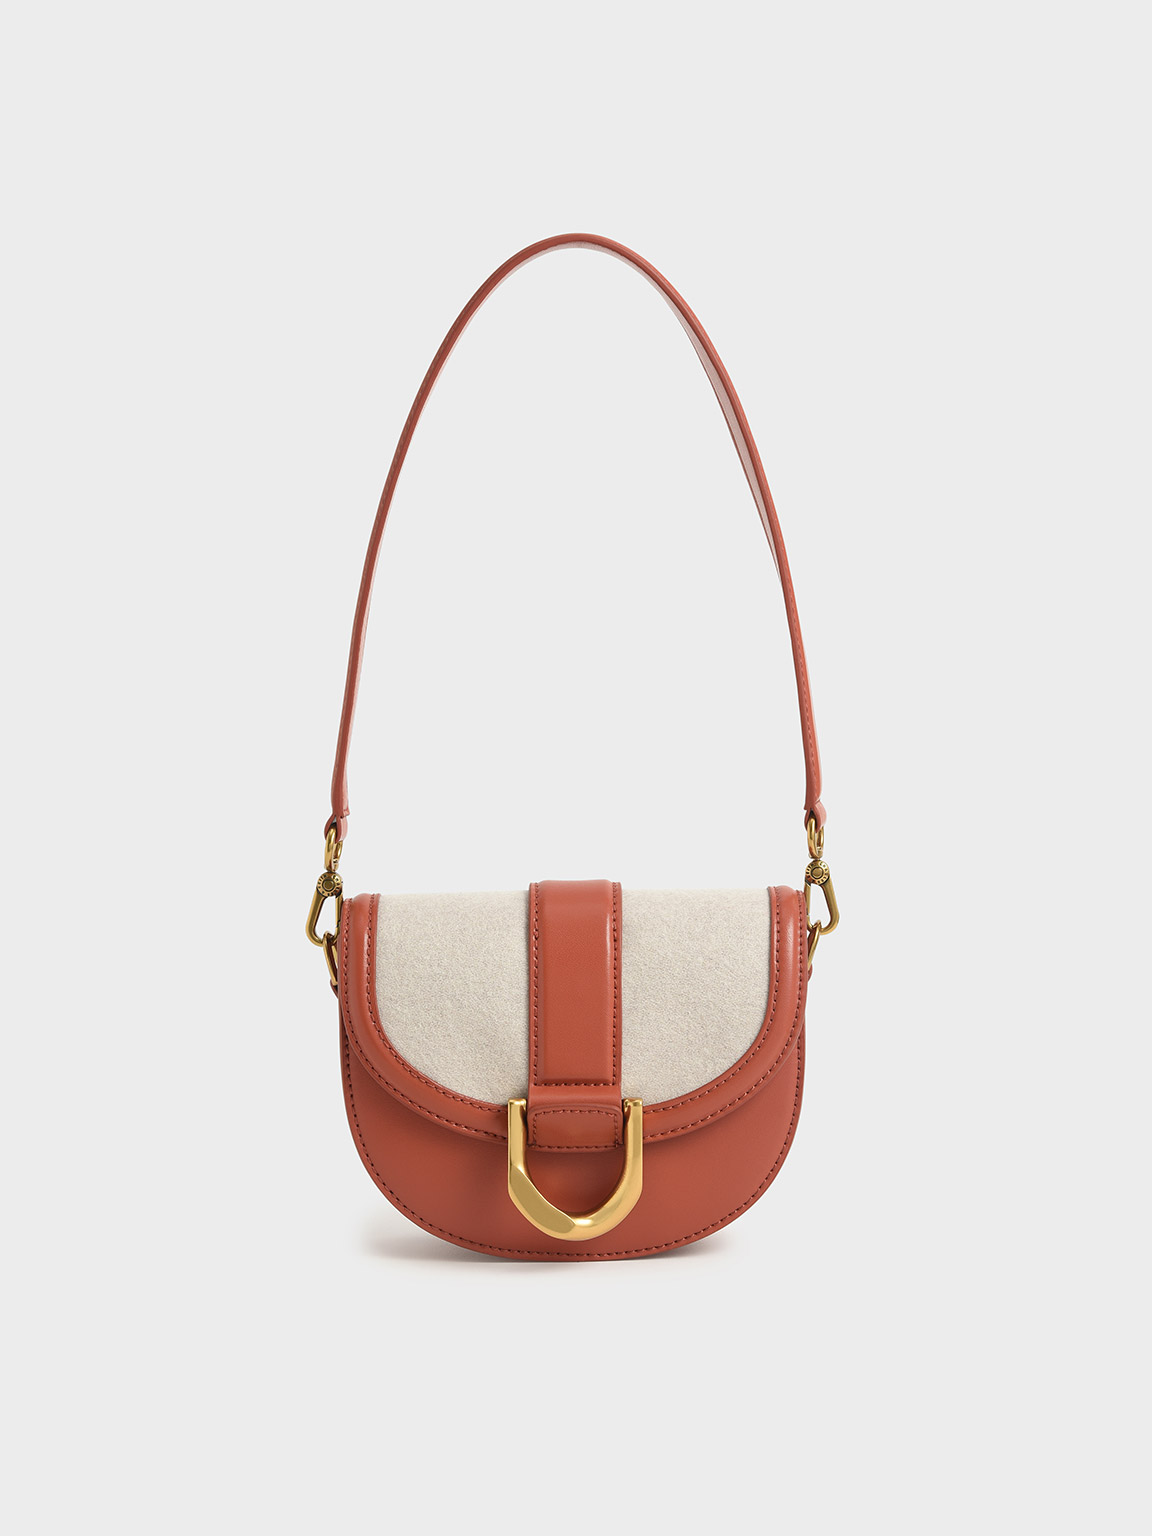 Charles & Keith Canvas Double Top Handle Structured Bag in Natural | Lyst  Australia